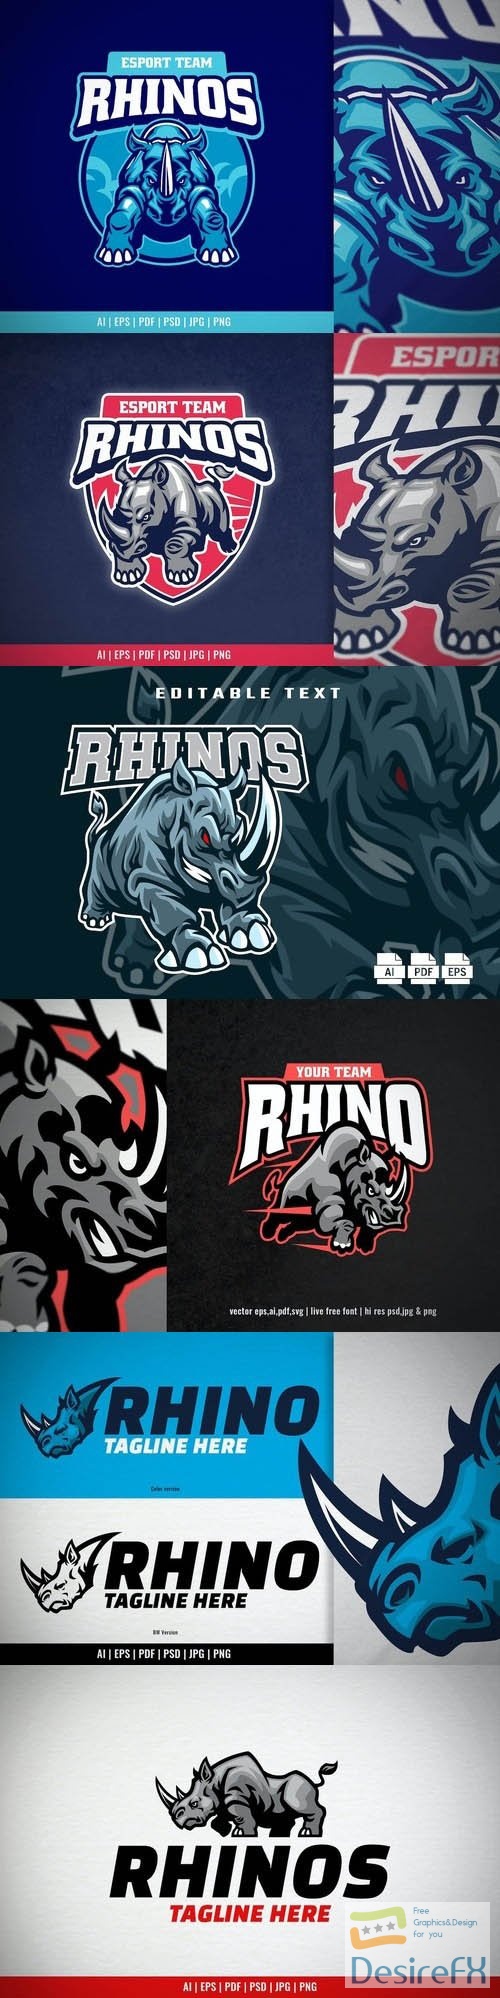 Rhino Stance for Tough and Power Logo Concept